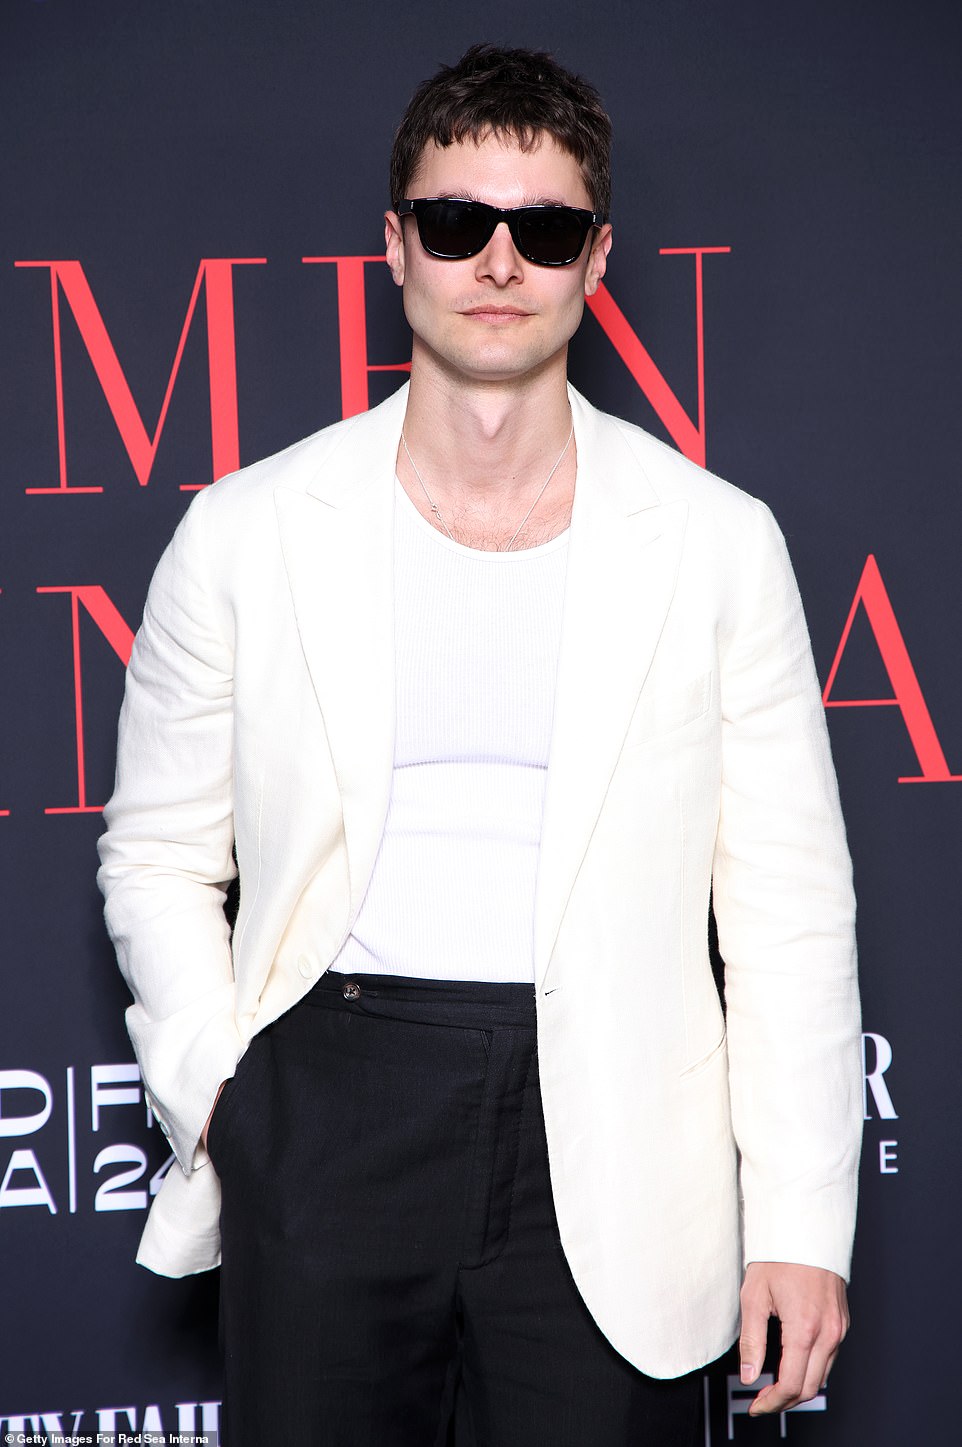 Dorian Grinspan looked handsome in a white henley shirt paired with a cream blazer and black trousers. The editor-in-chief of international fashion magazine Out of Order sported a pair of black wayfarer sunglasses on the red carpet